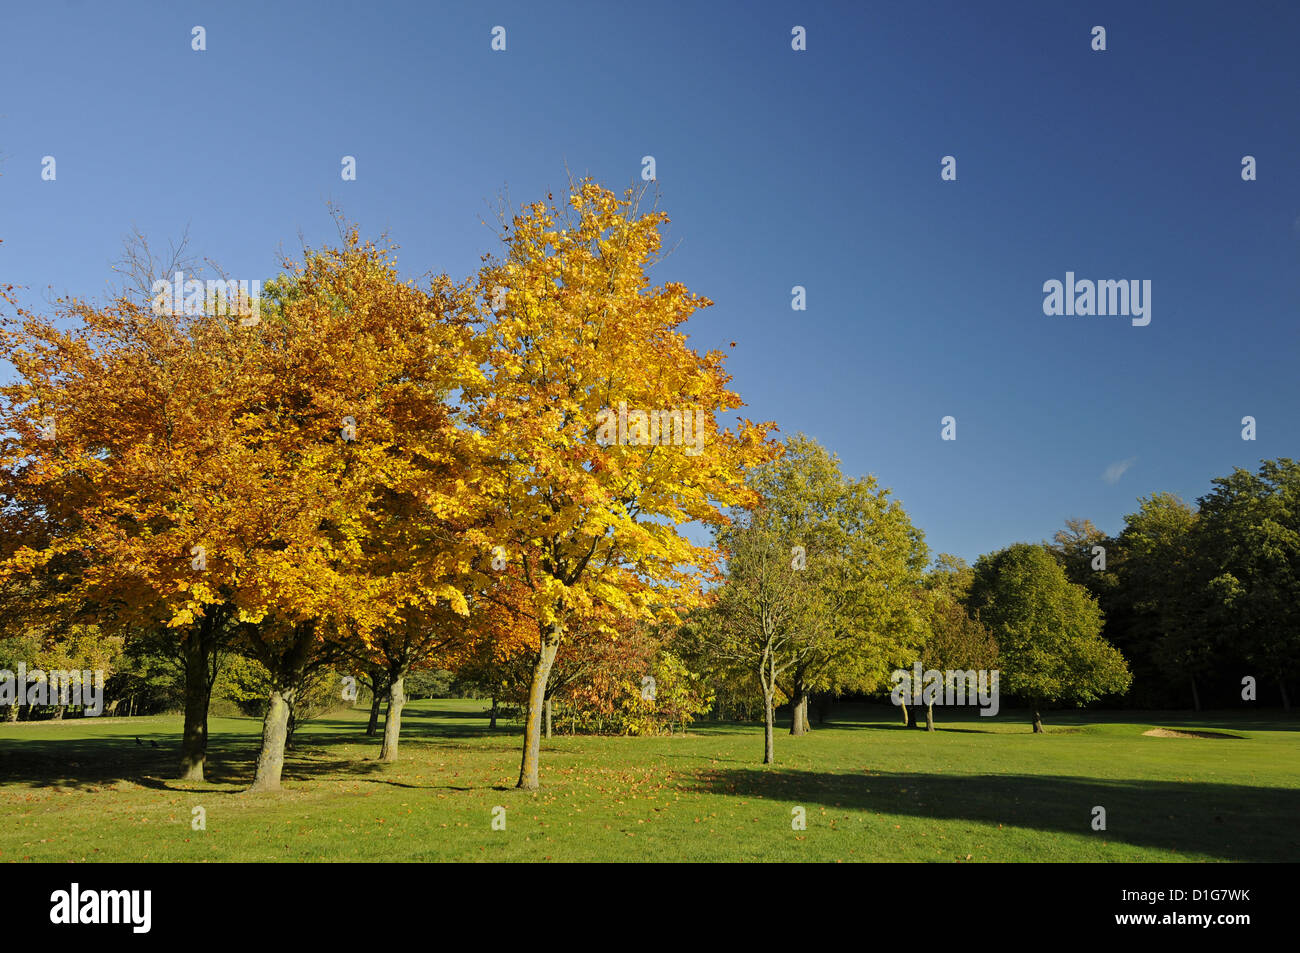 Autumn scene on a golf course in Bromley Kent England Stock Photo